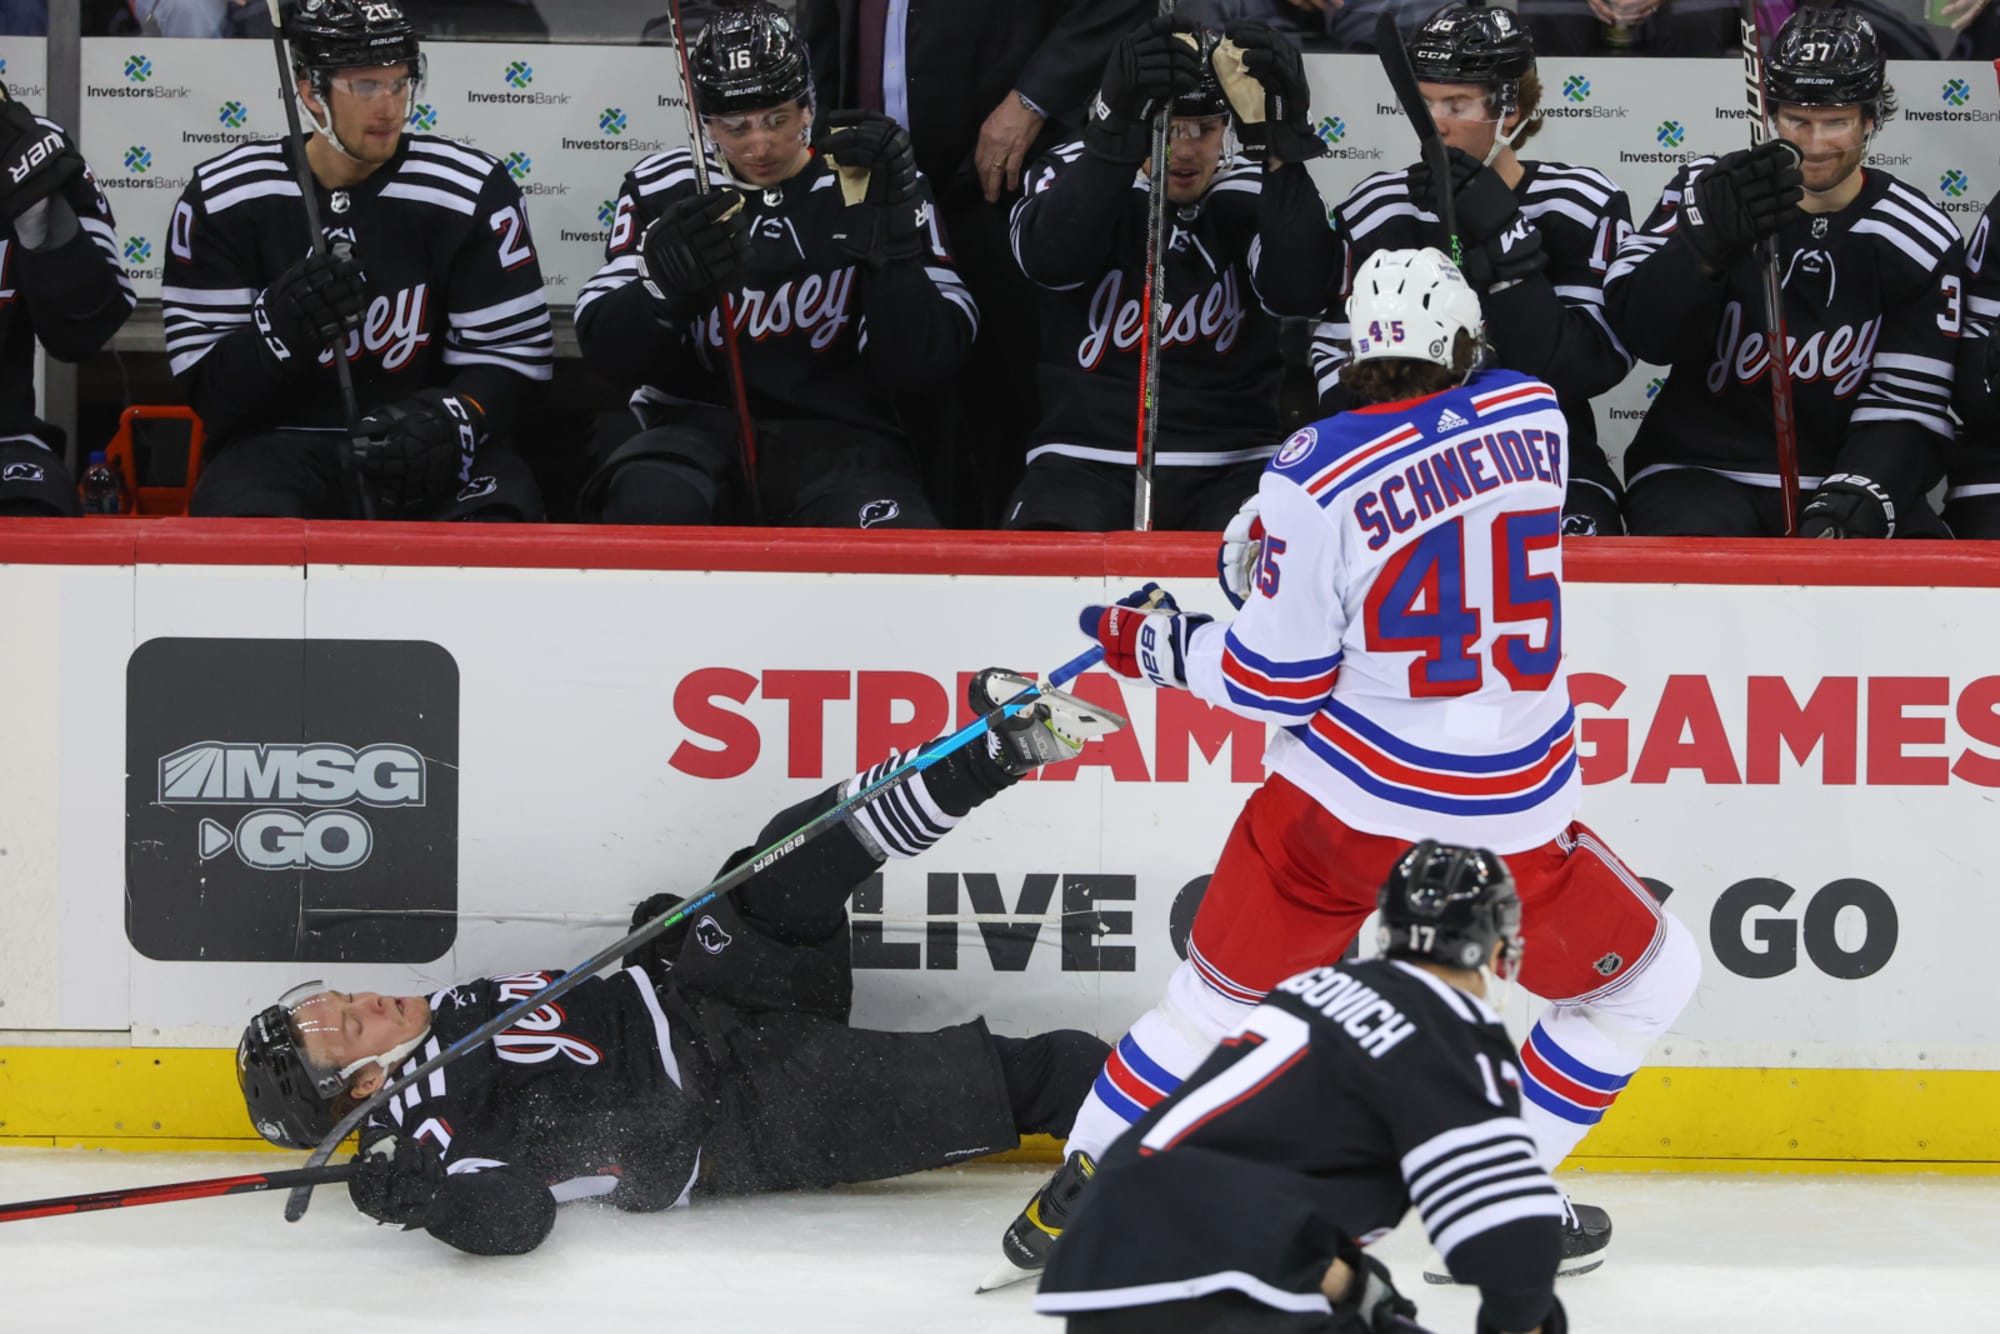 ESNY's 5 gif reaction to New Jersey Devils loss at New York Rangers